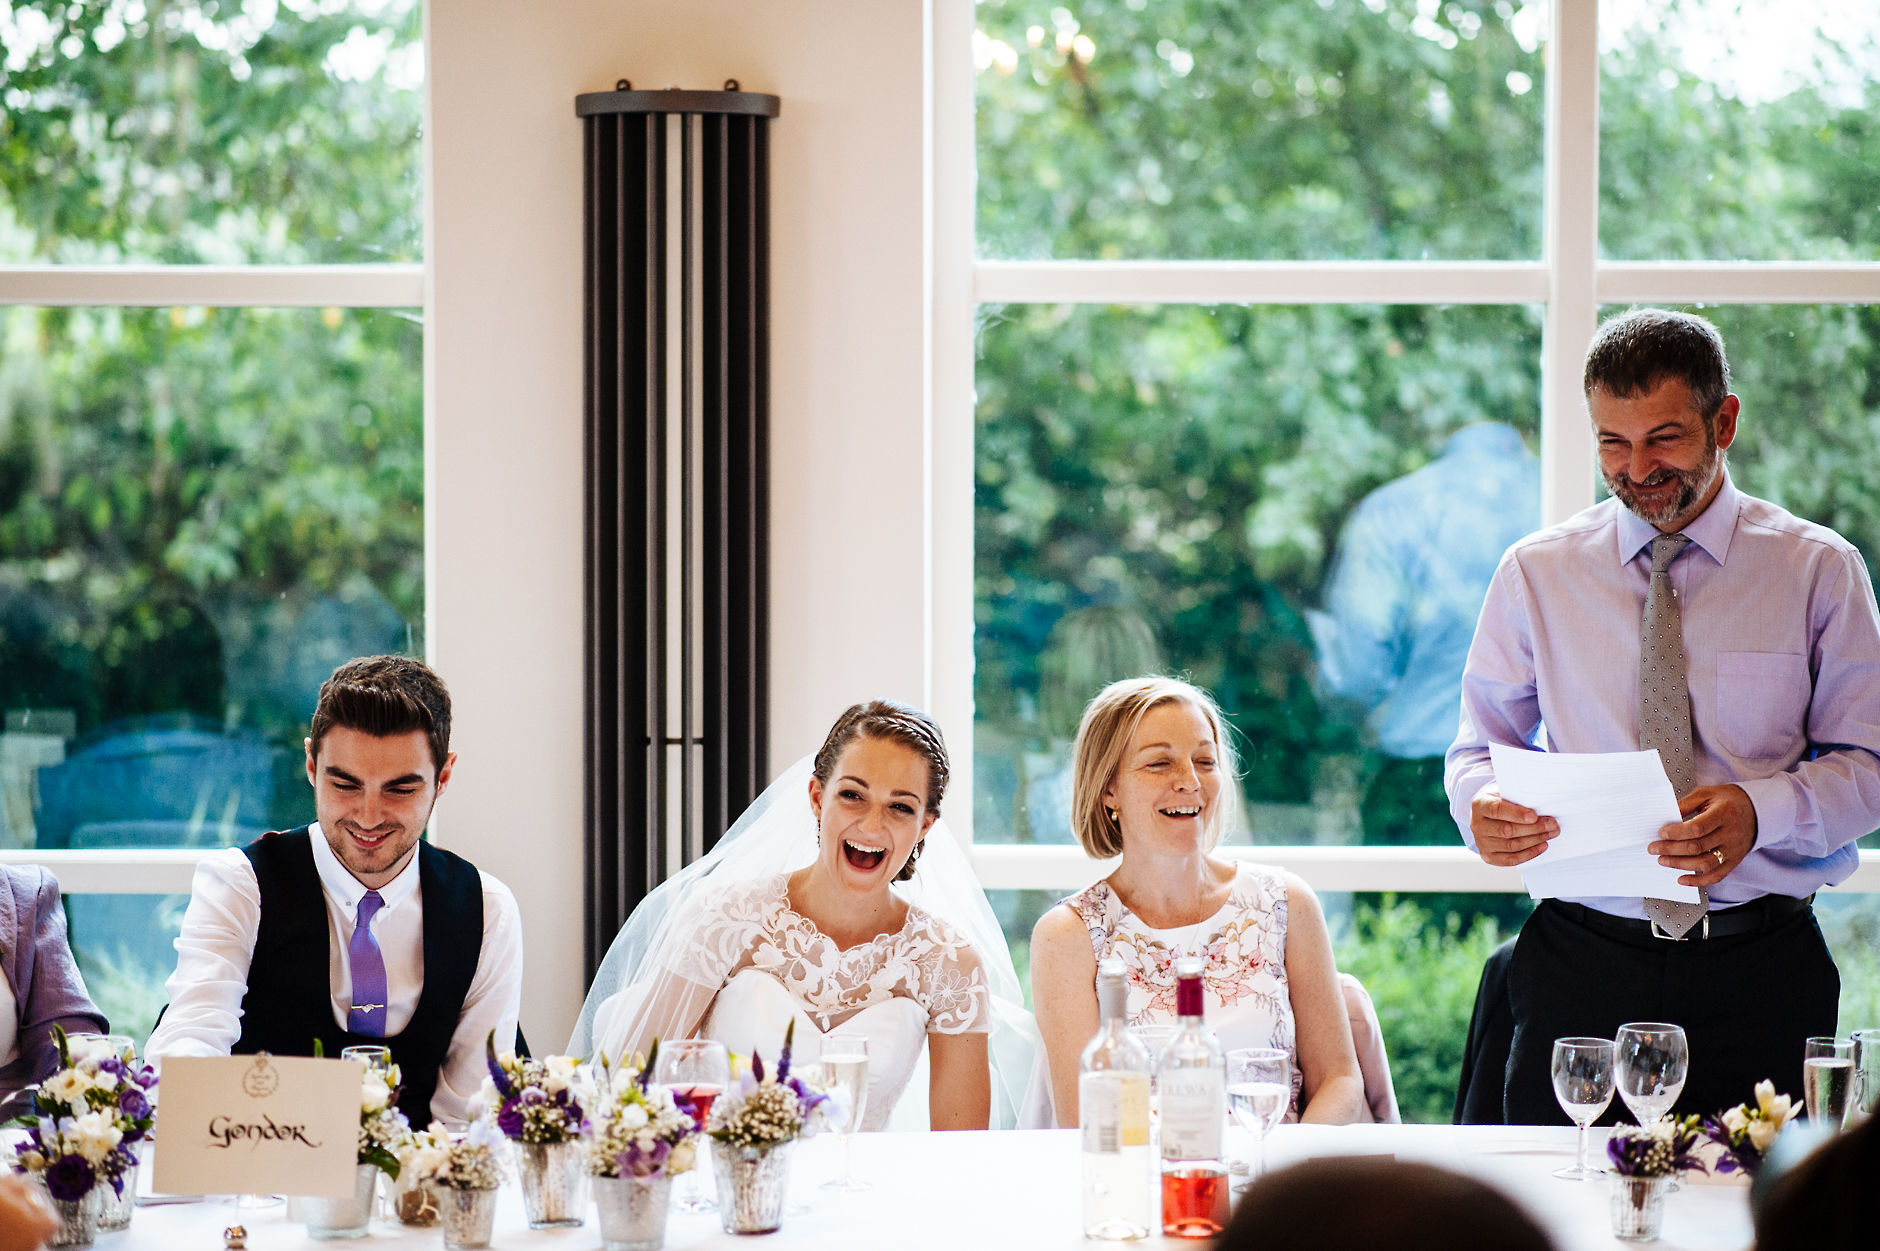 Laughing during wedding speeches